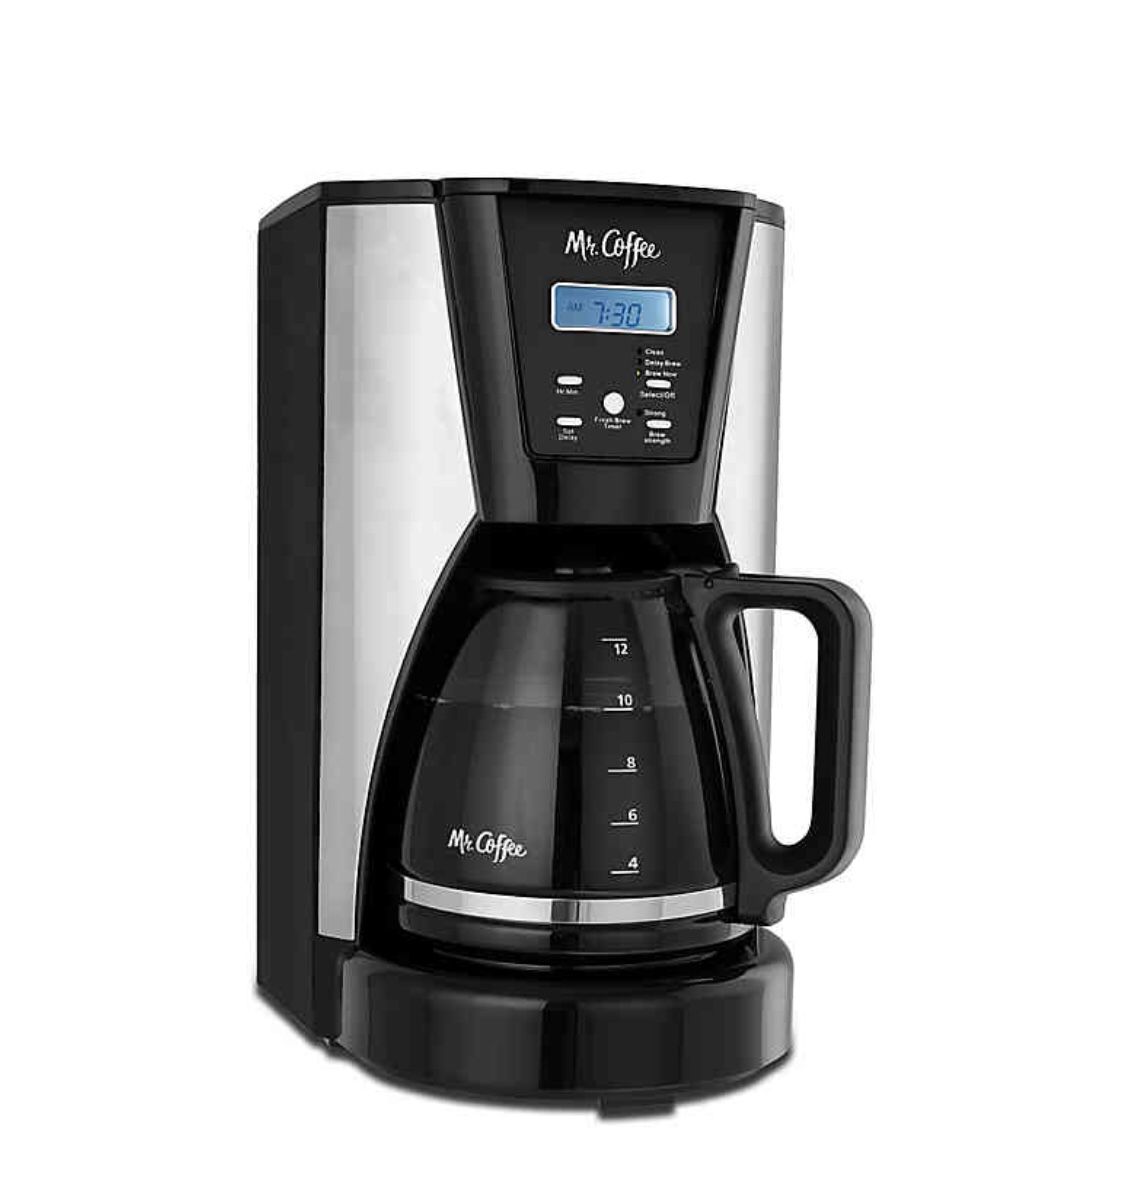 Mr. Coffee 12-Cup Programmable Coffee Maker NEW